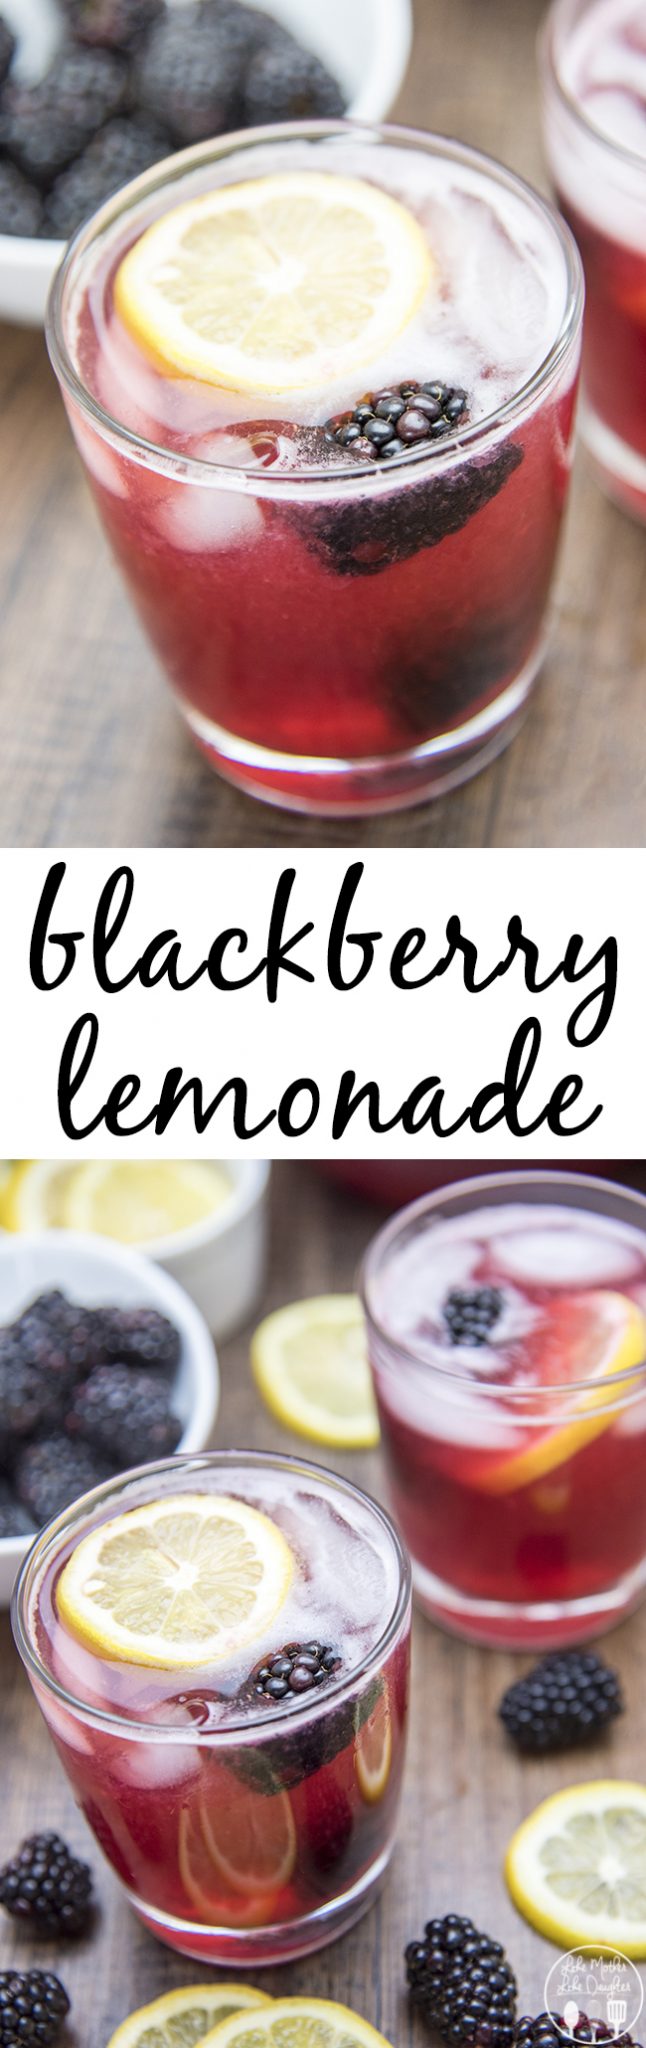 Title card for blackberry lemonade with text.